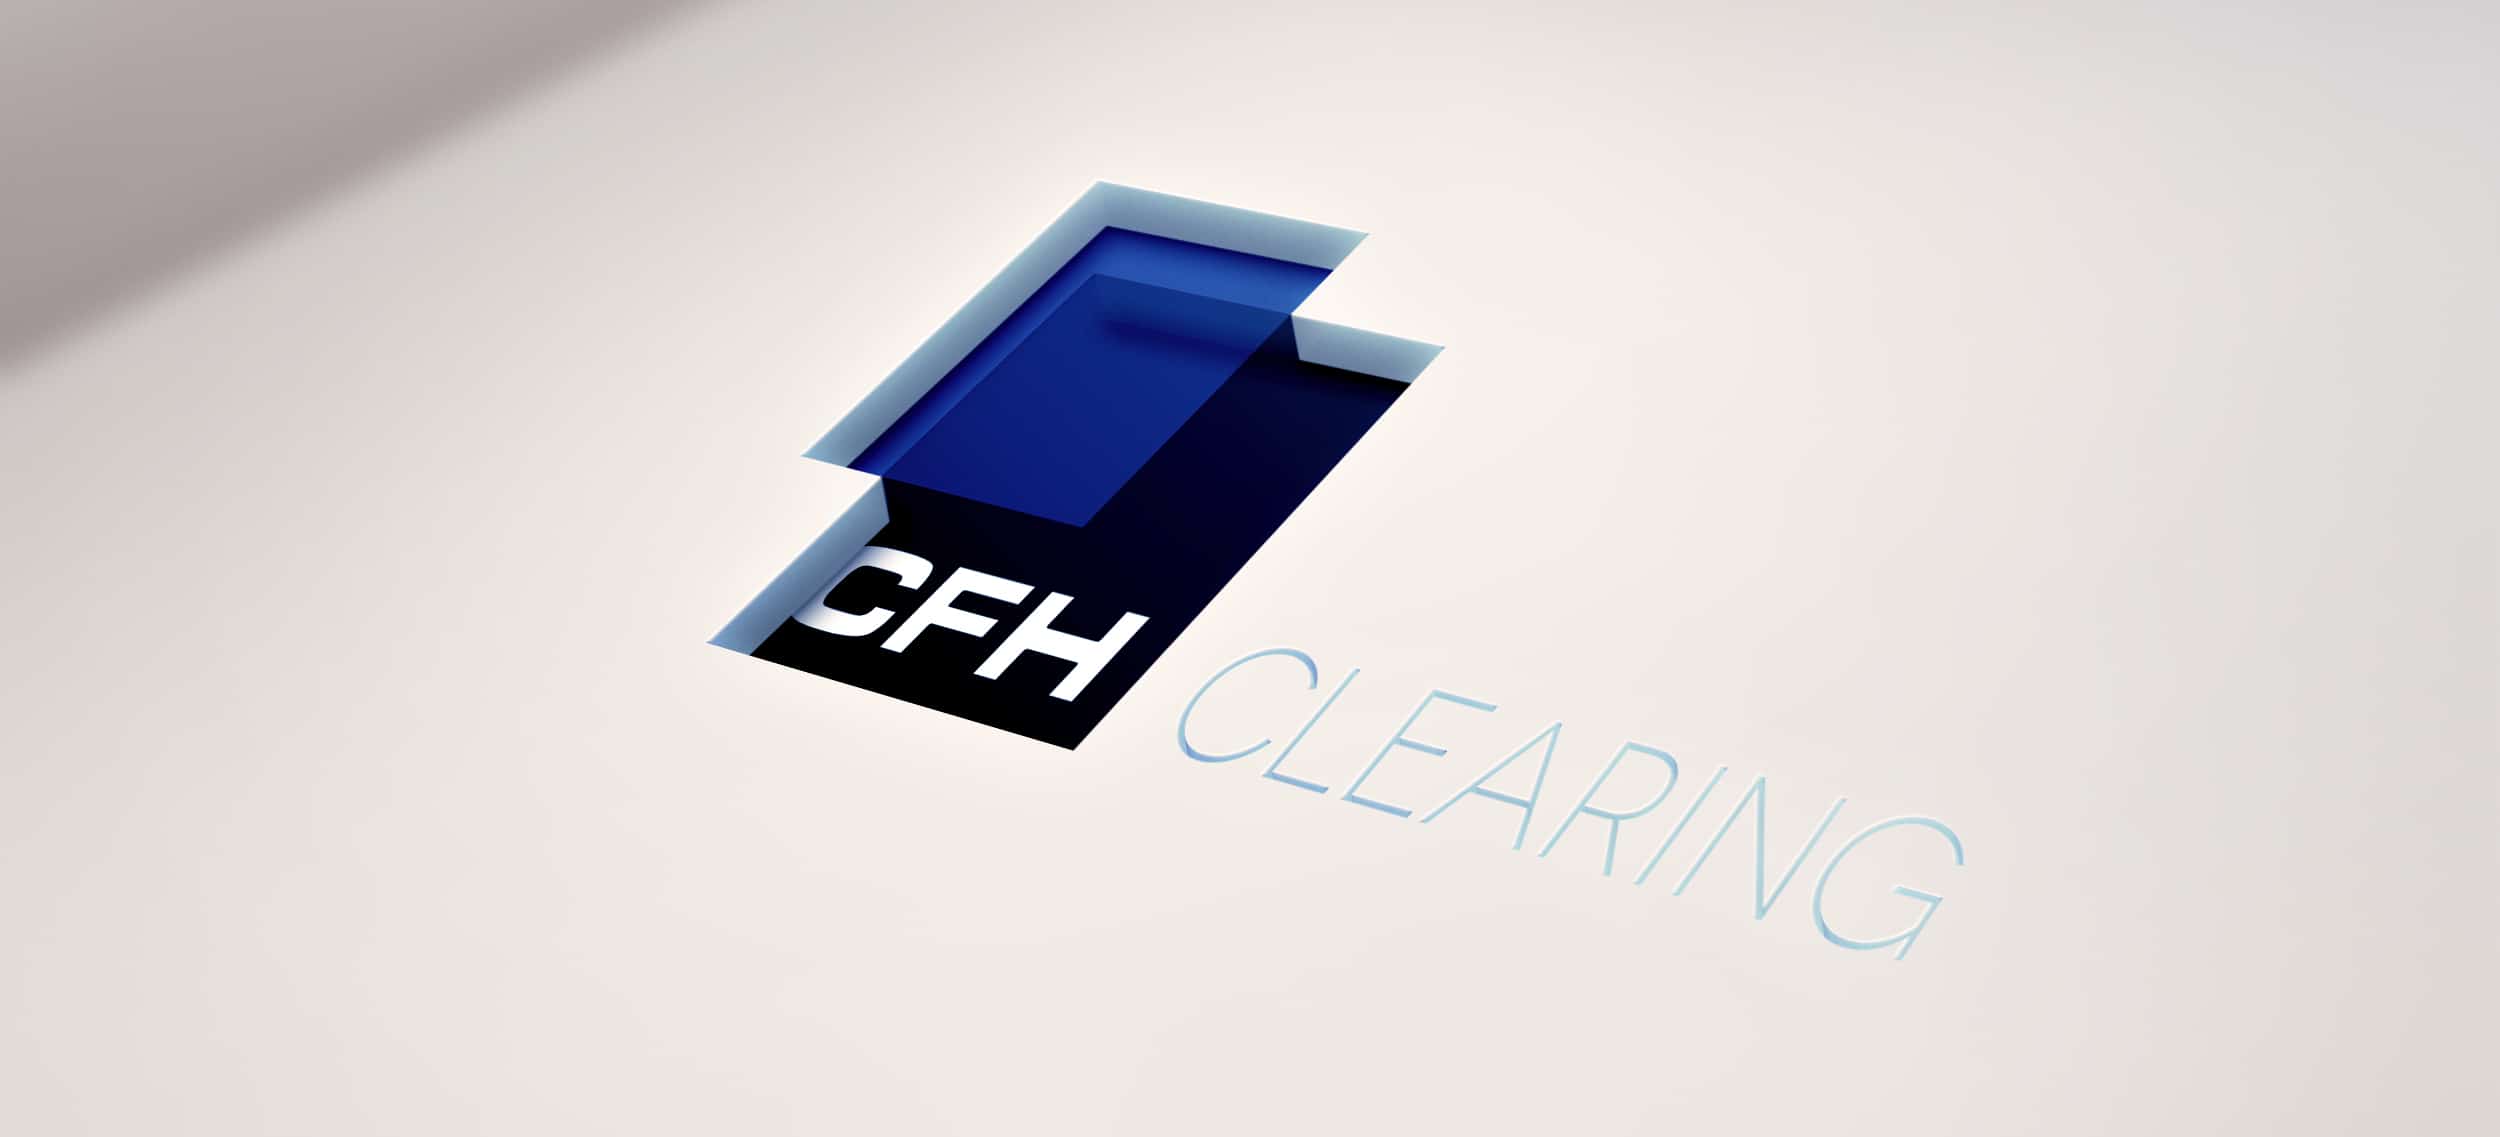 CFH Clearing Refreshes Institutional Team, Adds James Dewdney as Sales Manager